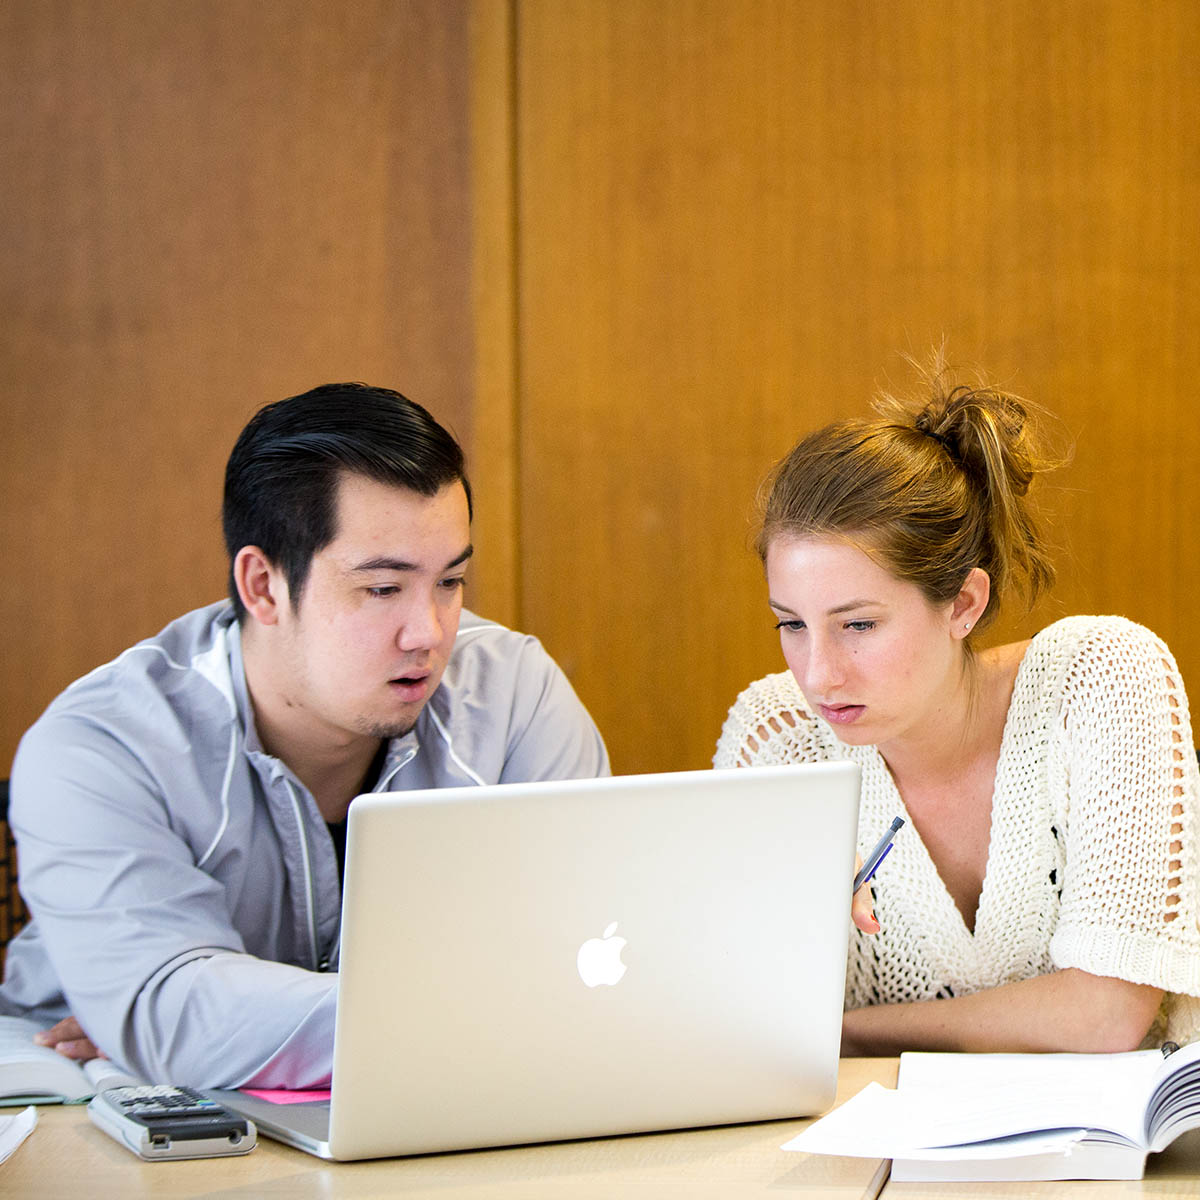 Photo of two students working together on a laptop in a classroom